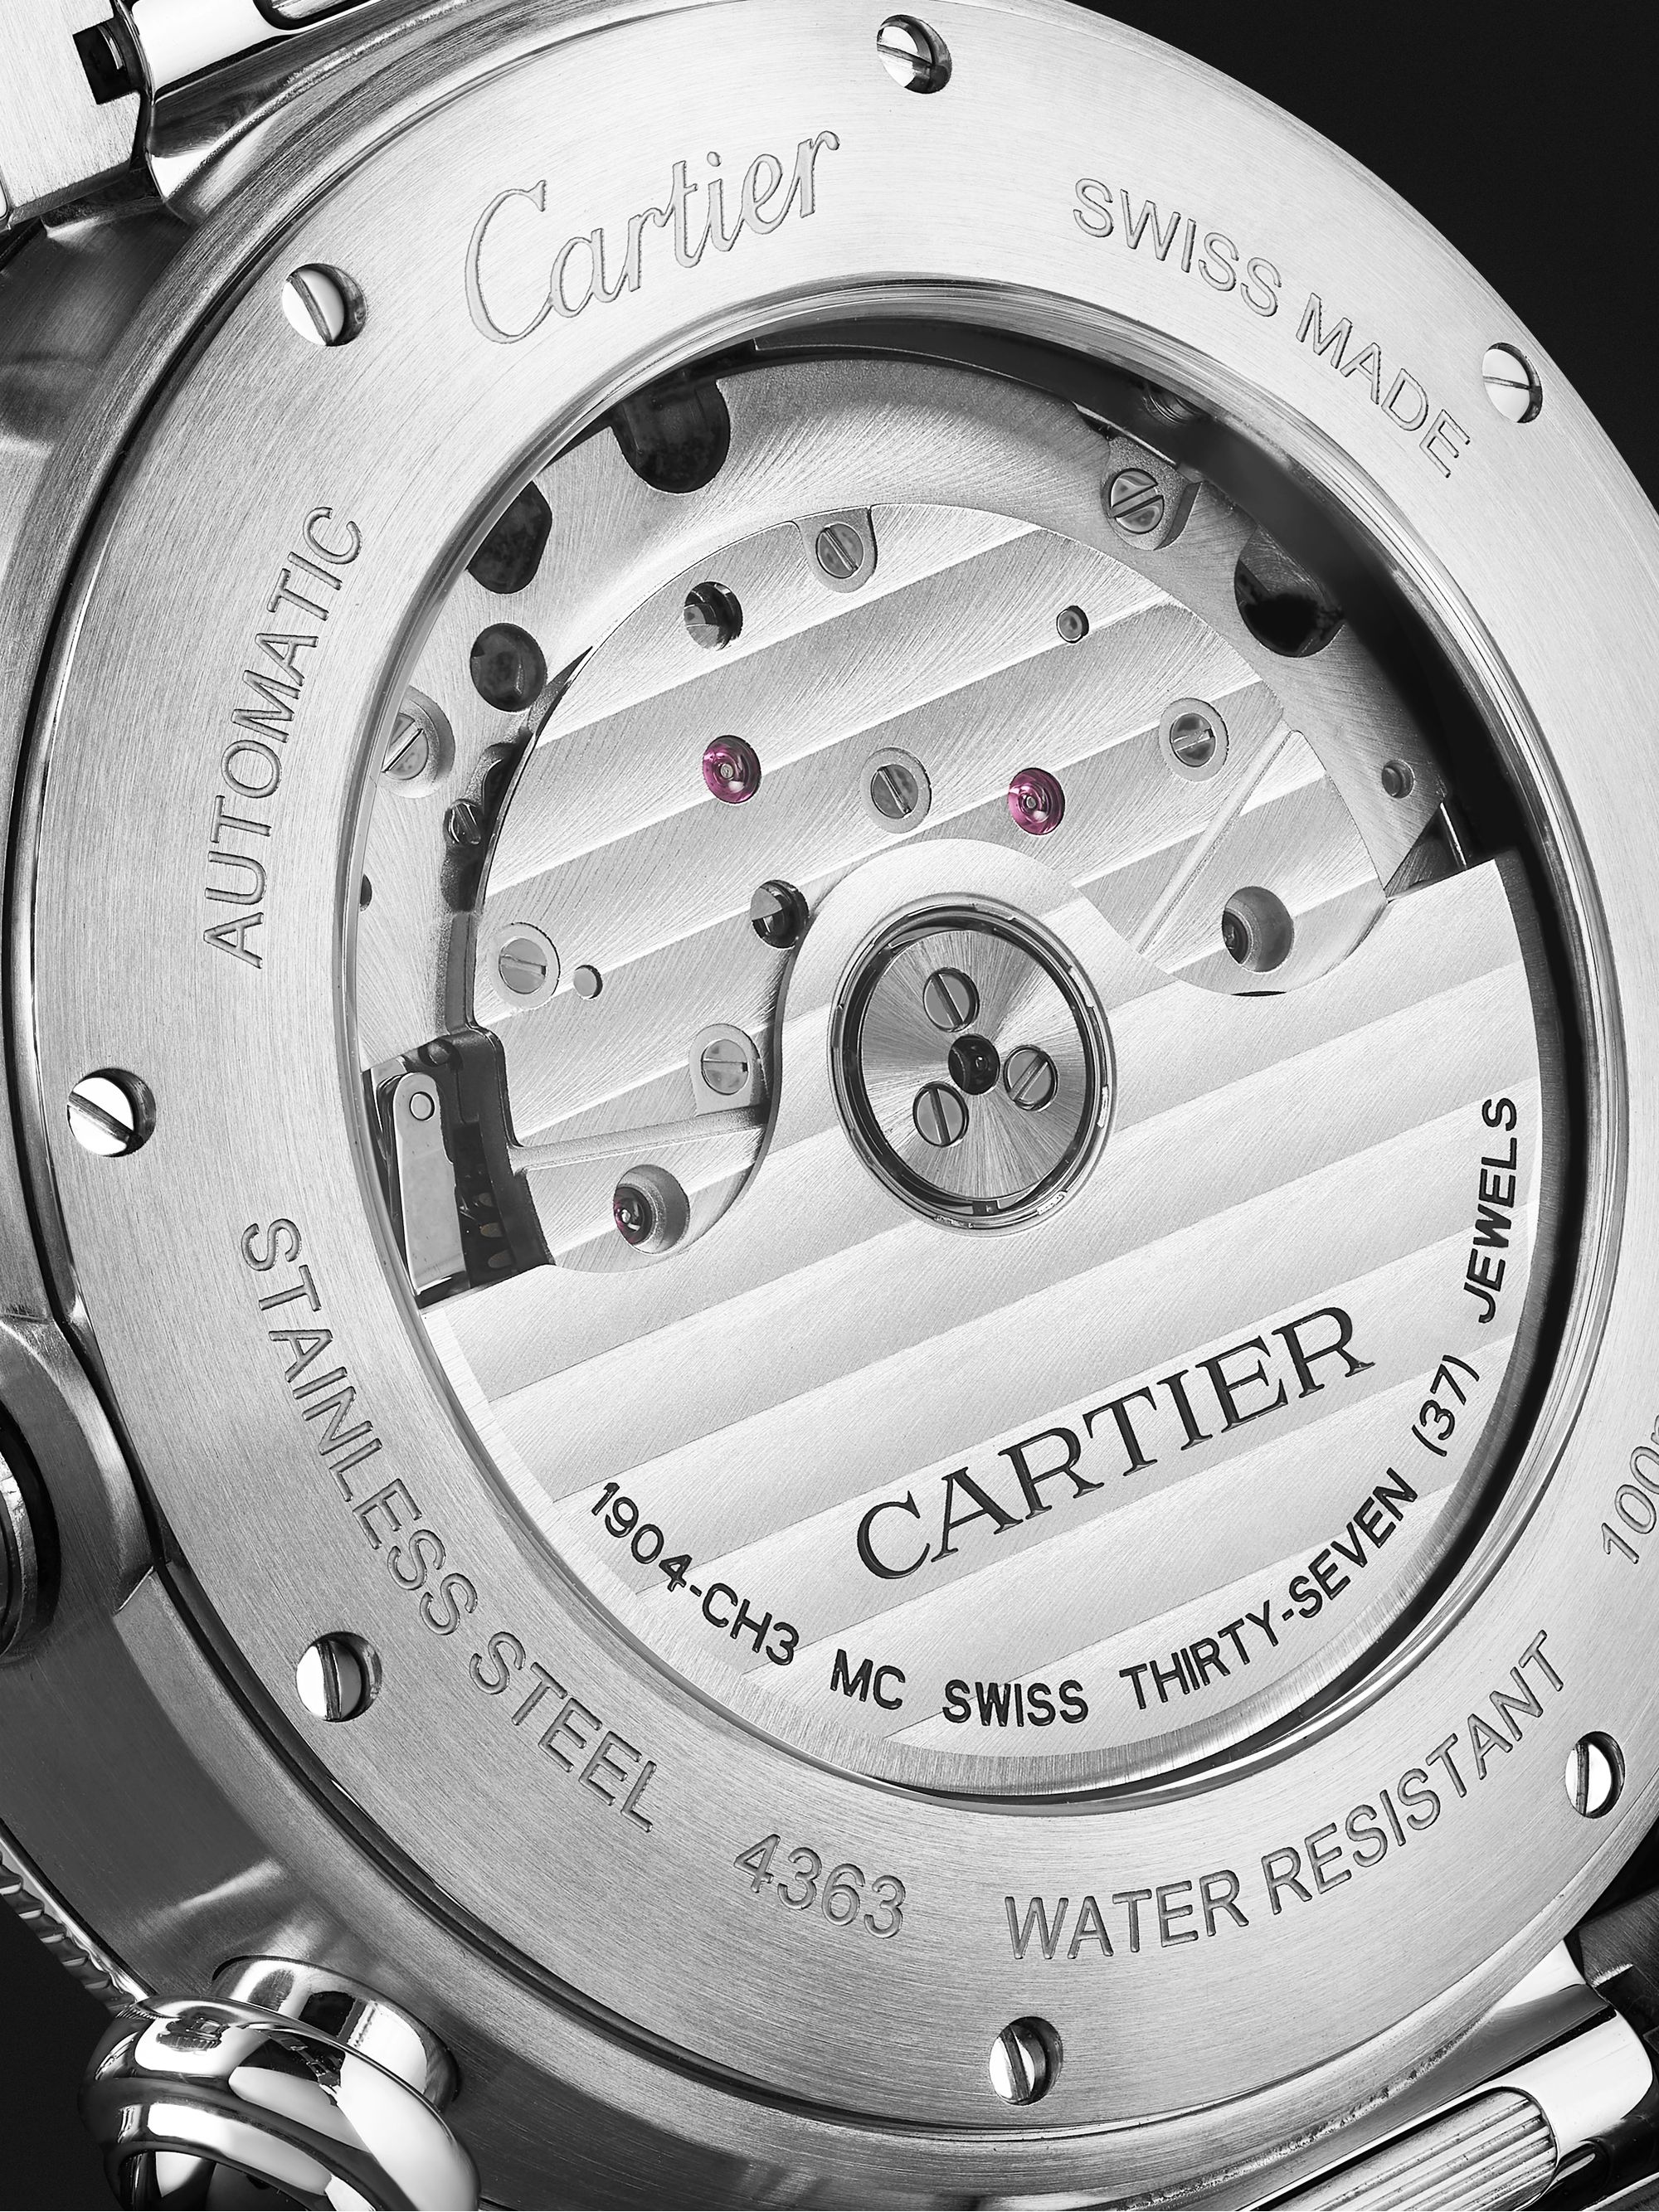 CARTIER Pasha de Cartier Automatic Chronograph 41mm Stainless Steel Watch, Ref. No. WSPA0018